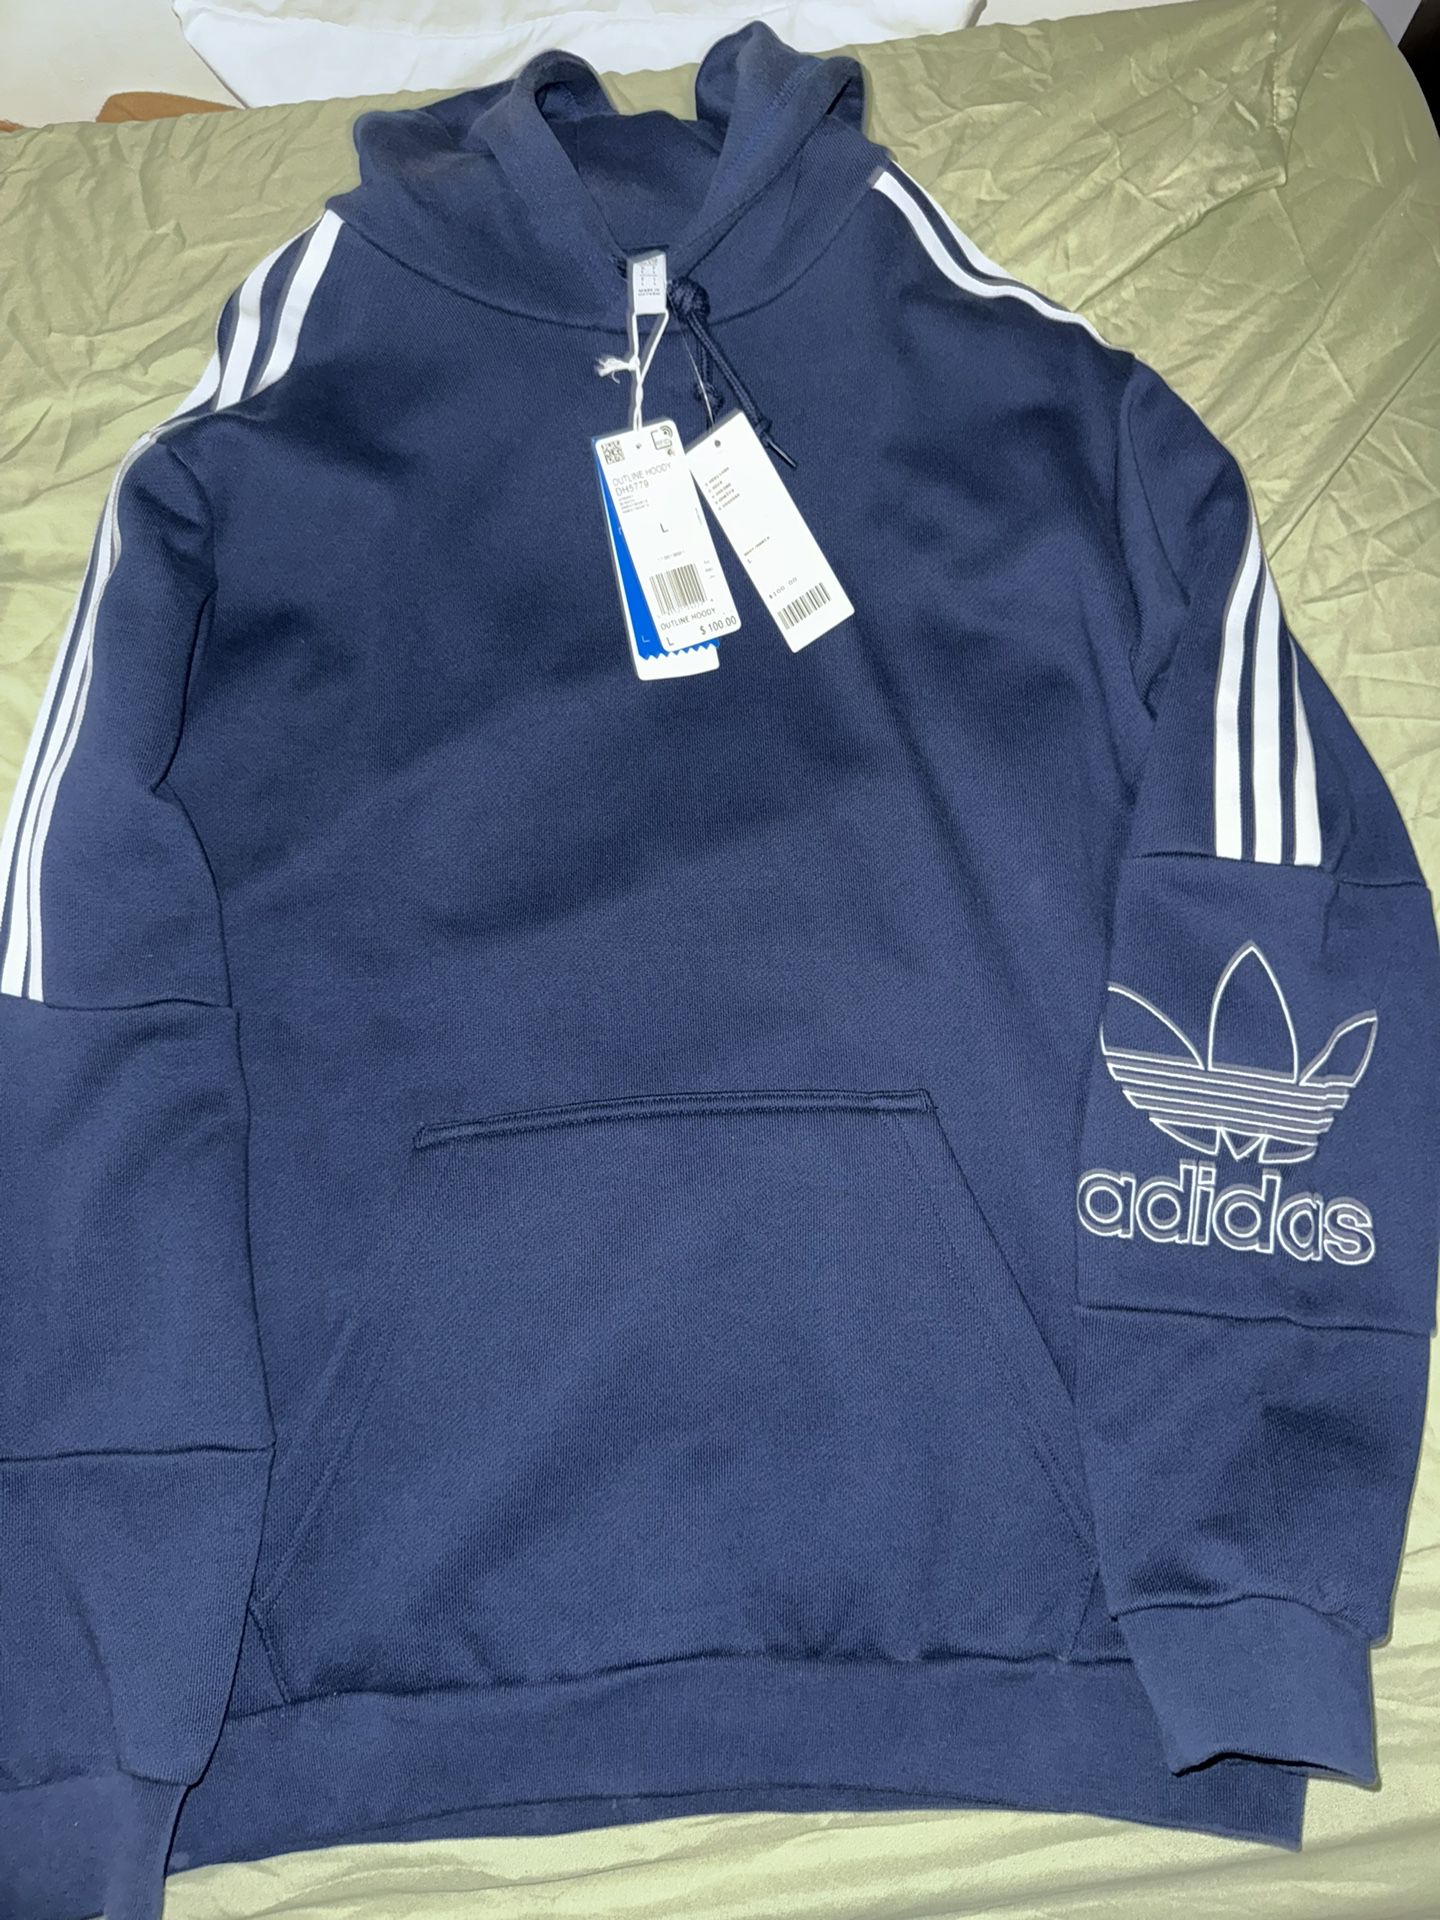 Adidas Outline Hoodie Size L